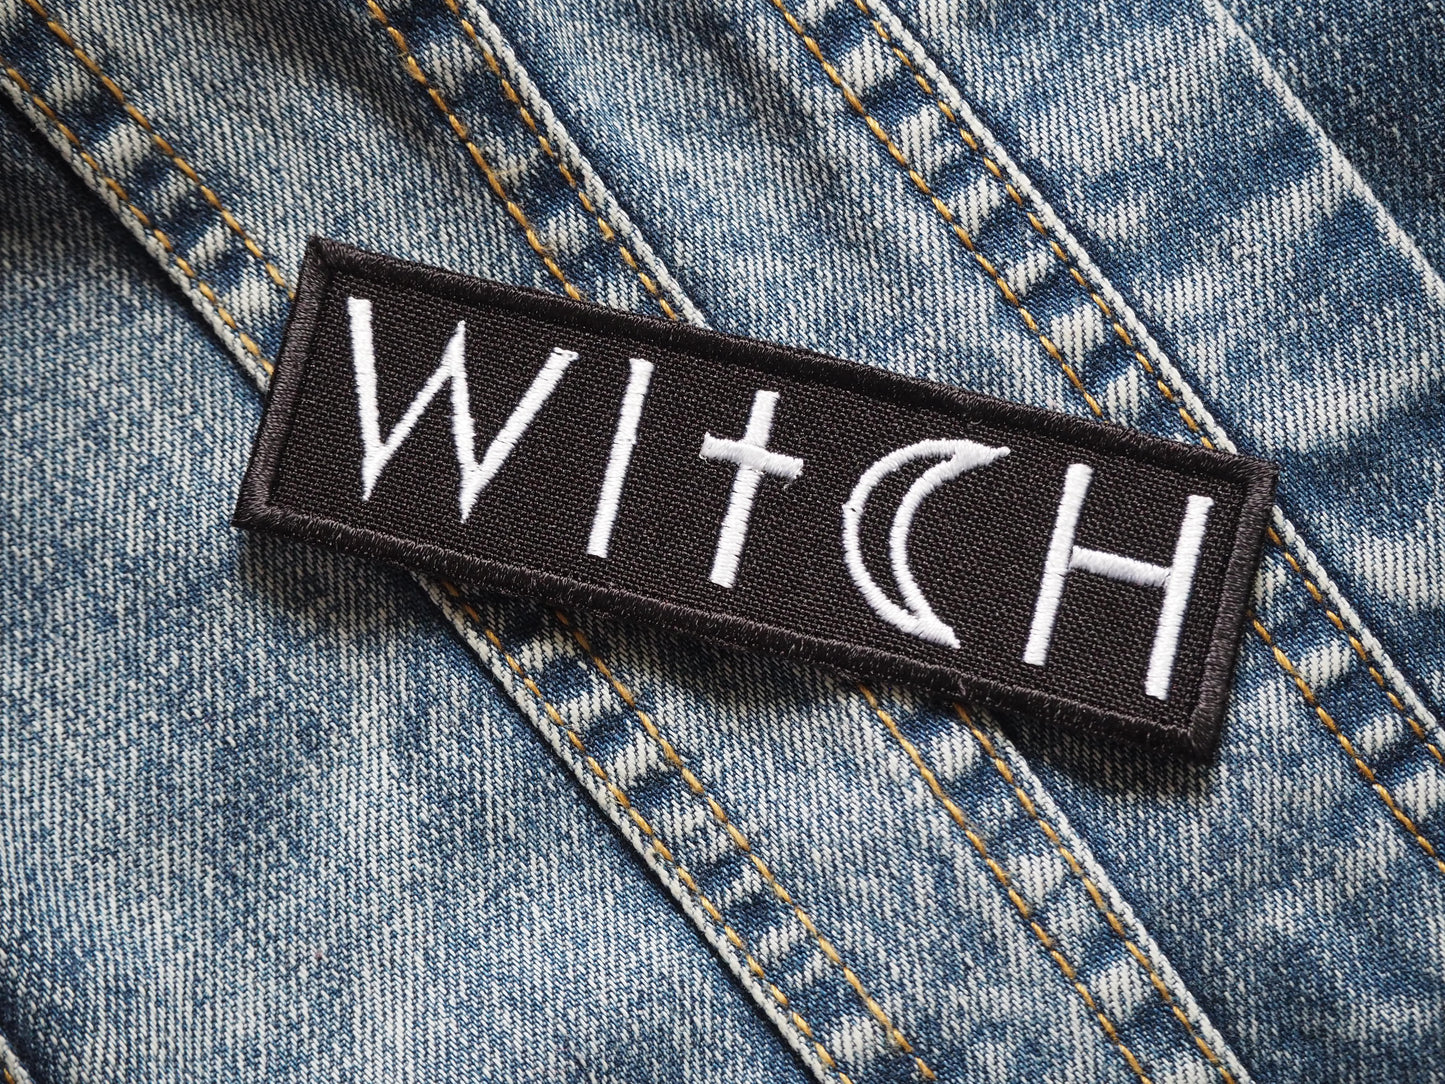 WITCH Embroidered Patch